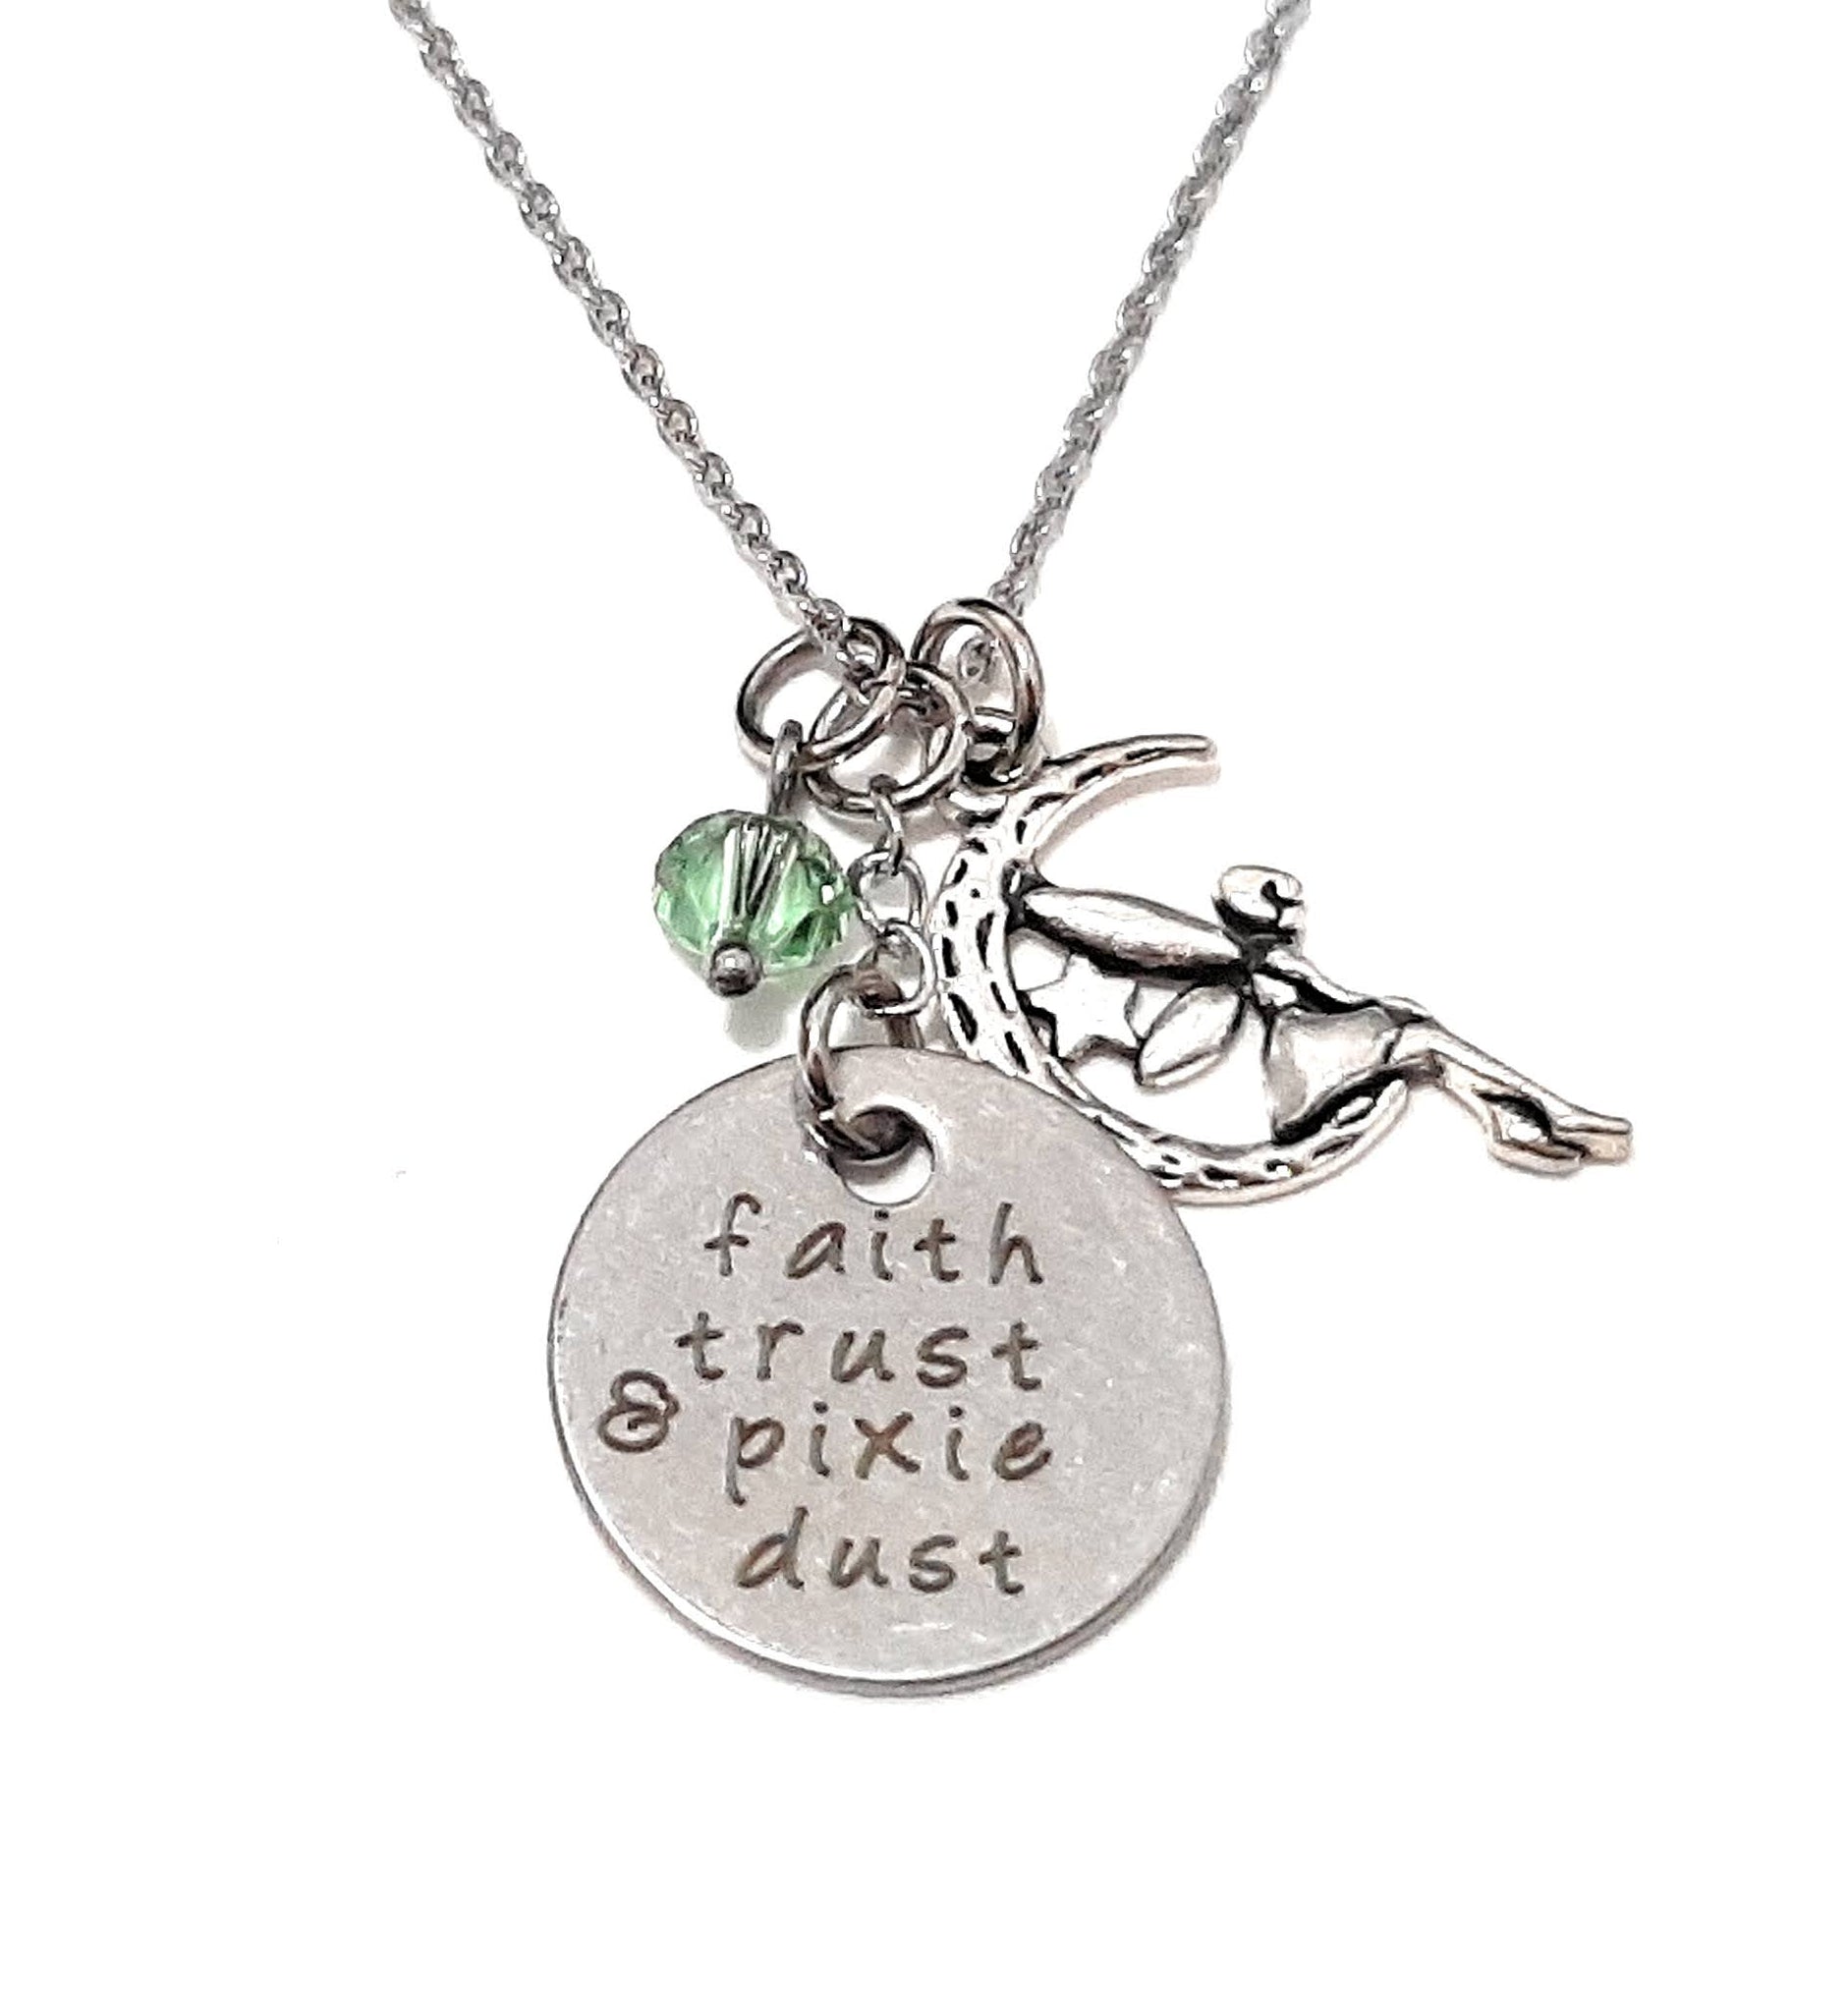 Message Pendant Necklace "Faith Trust & Pixie Dust" Your Choice of Charm and Birthstone Color